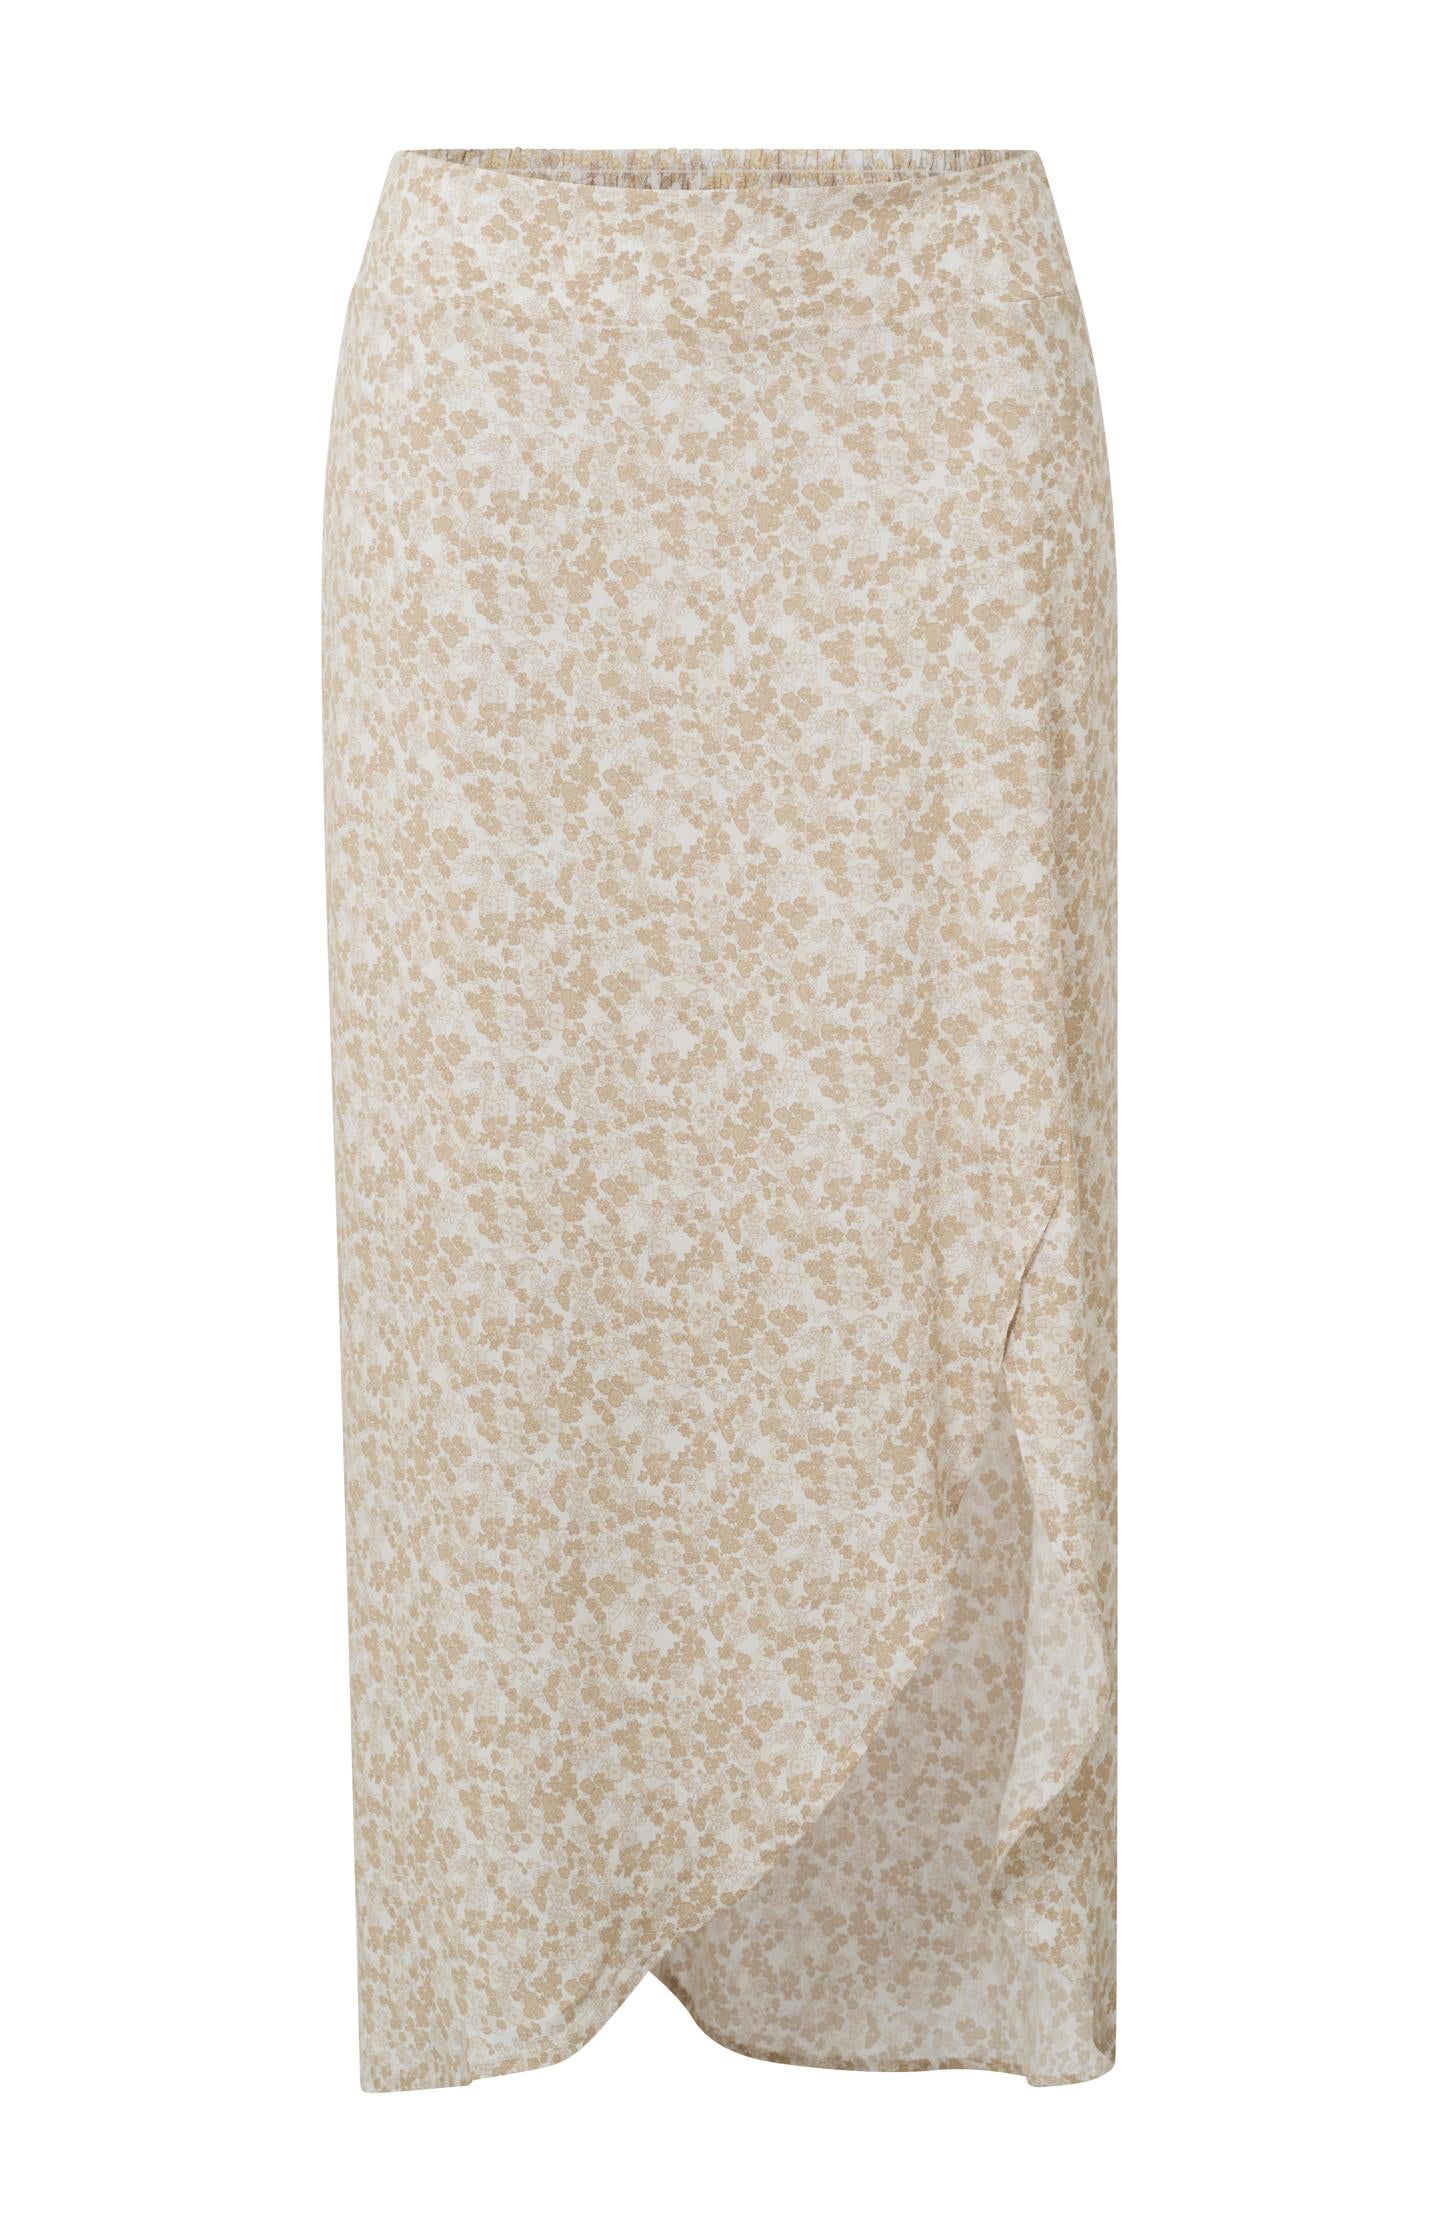 Midi skirt with elastic waist, wrap effect and floral print - Type: product